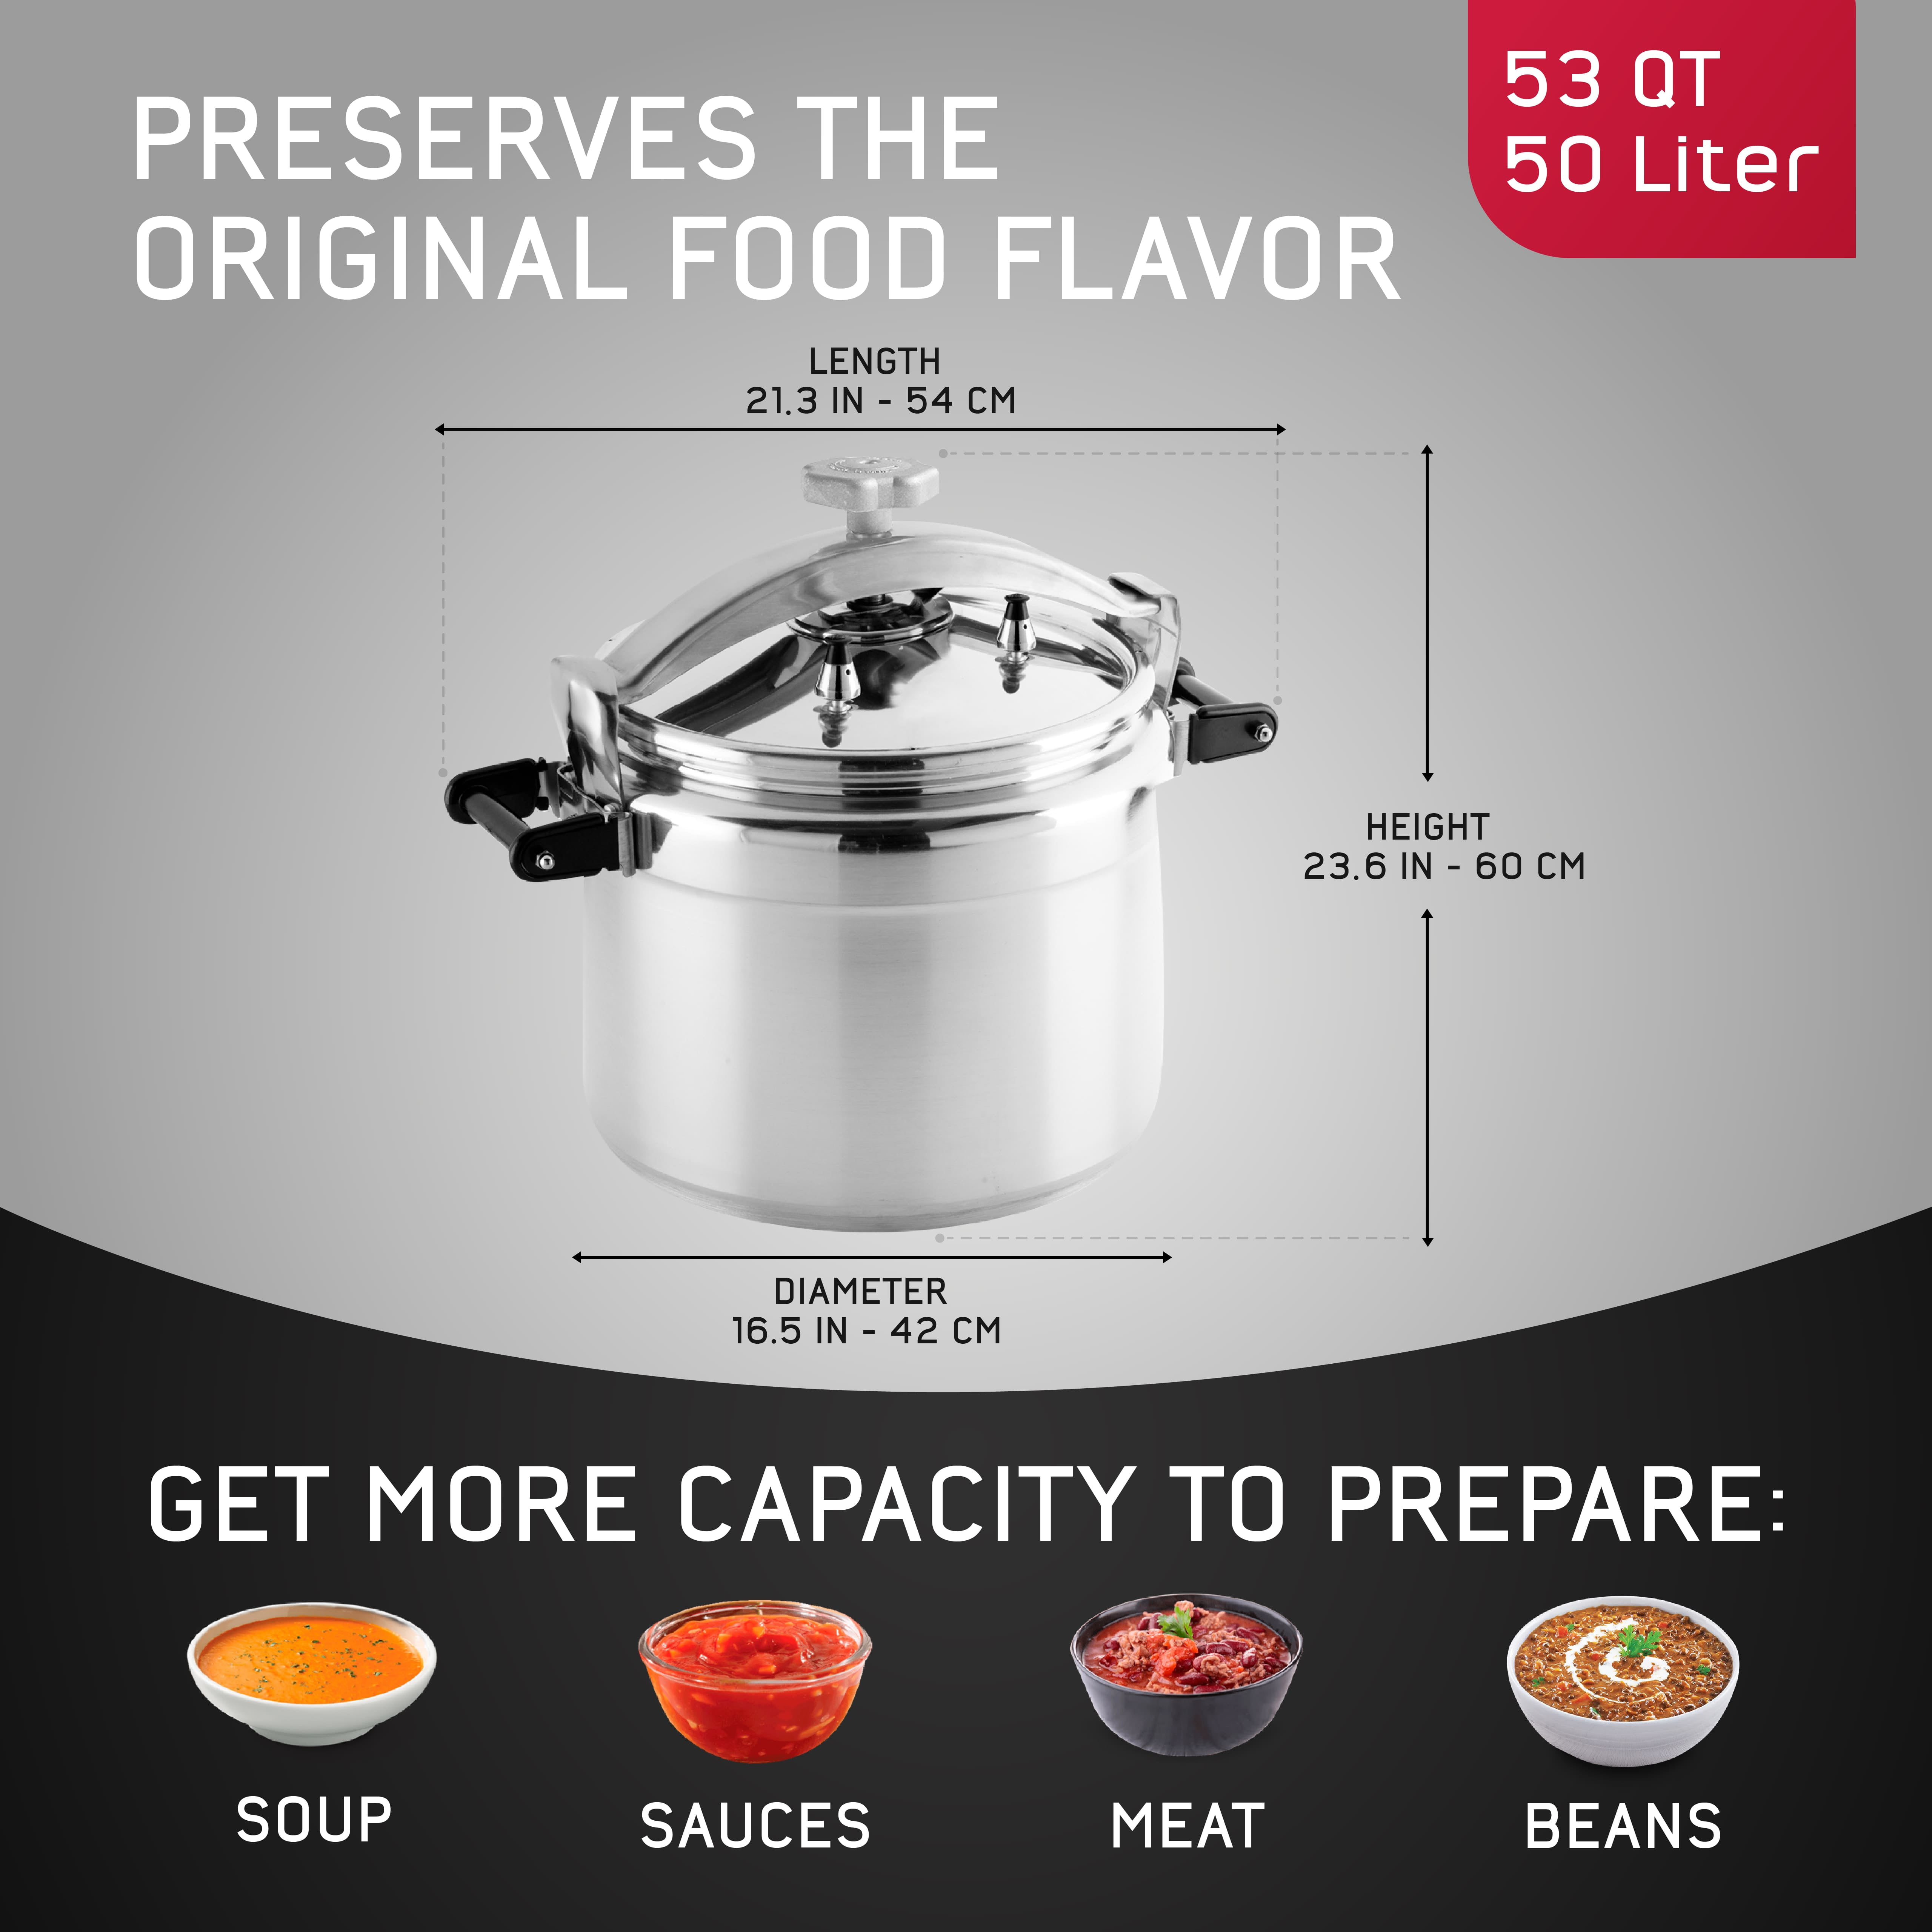 Universal 26Qt / 25L Professional Pressure Cooker, Sturdy, Heavy-Duty Aluminum Construction with Multiple Safety Systems